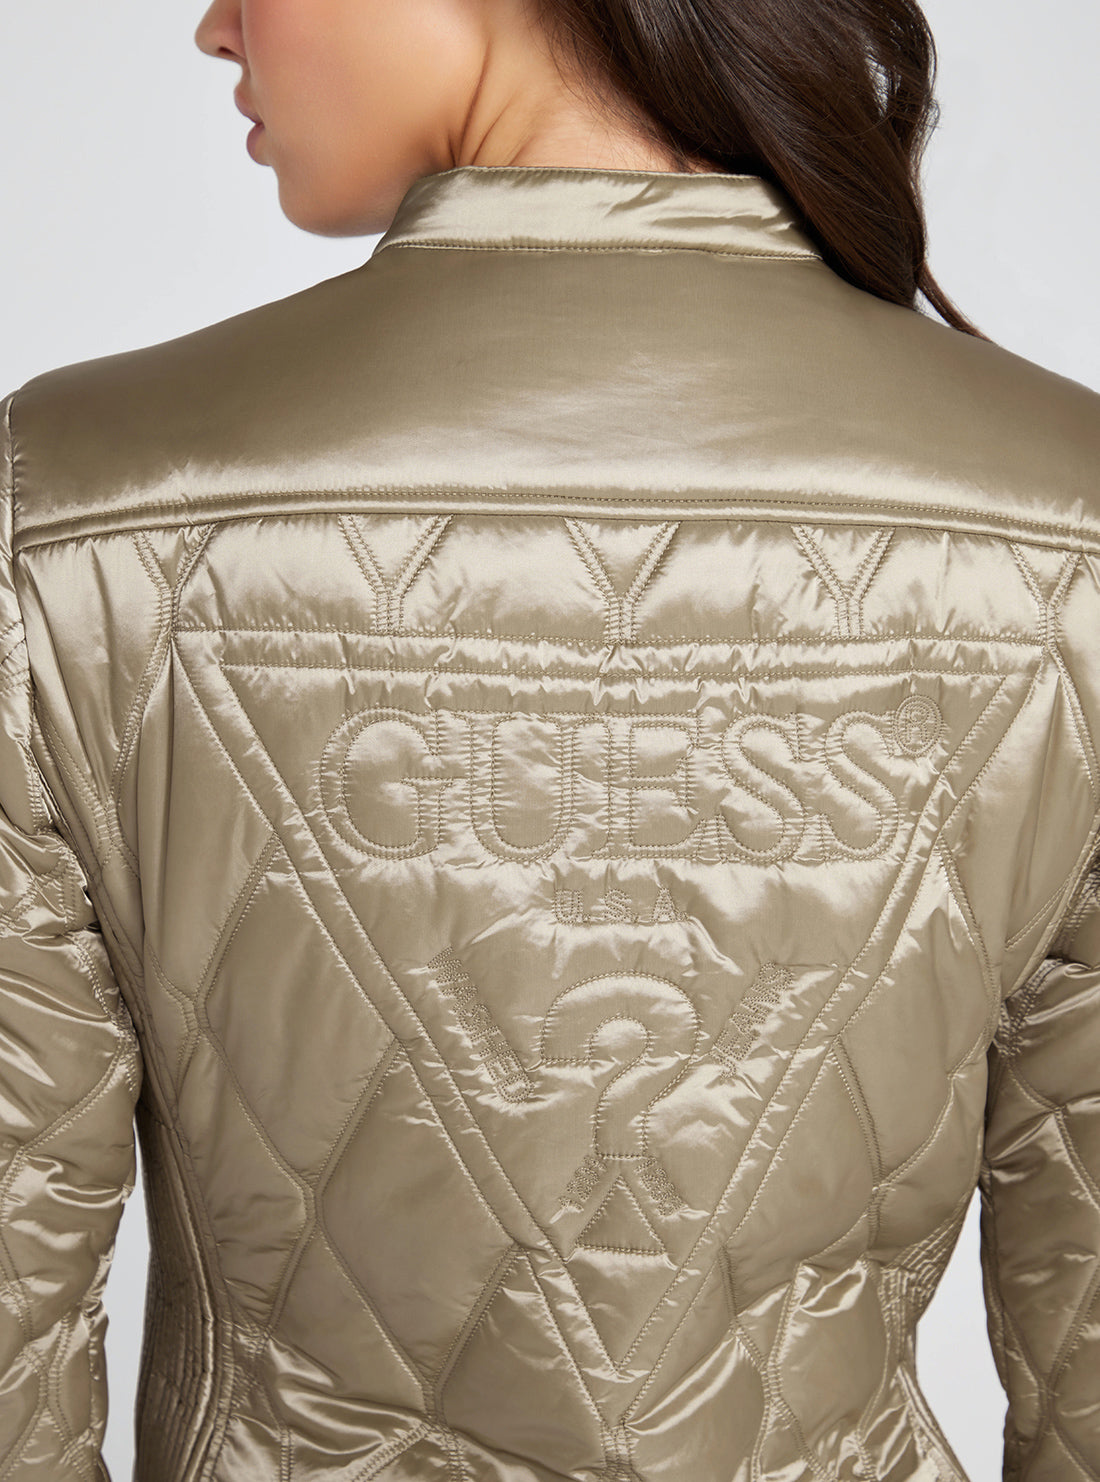 GUESS Eco Gold New Marine Jacket detail view